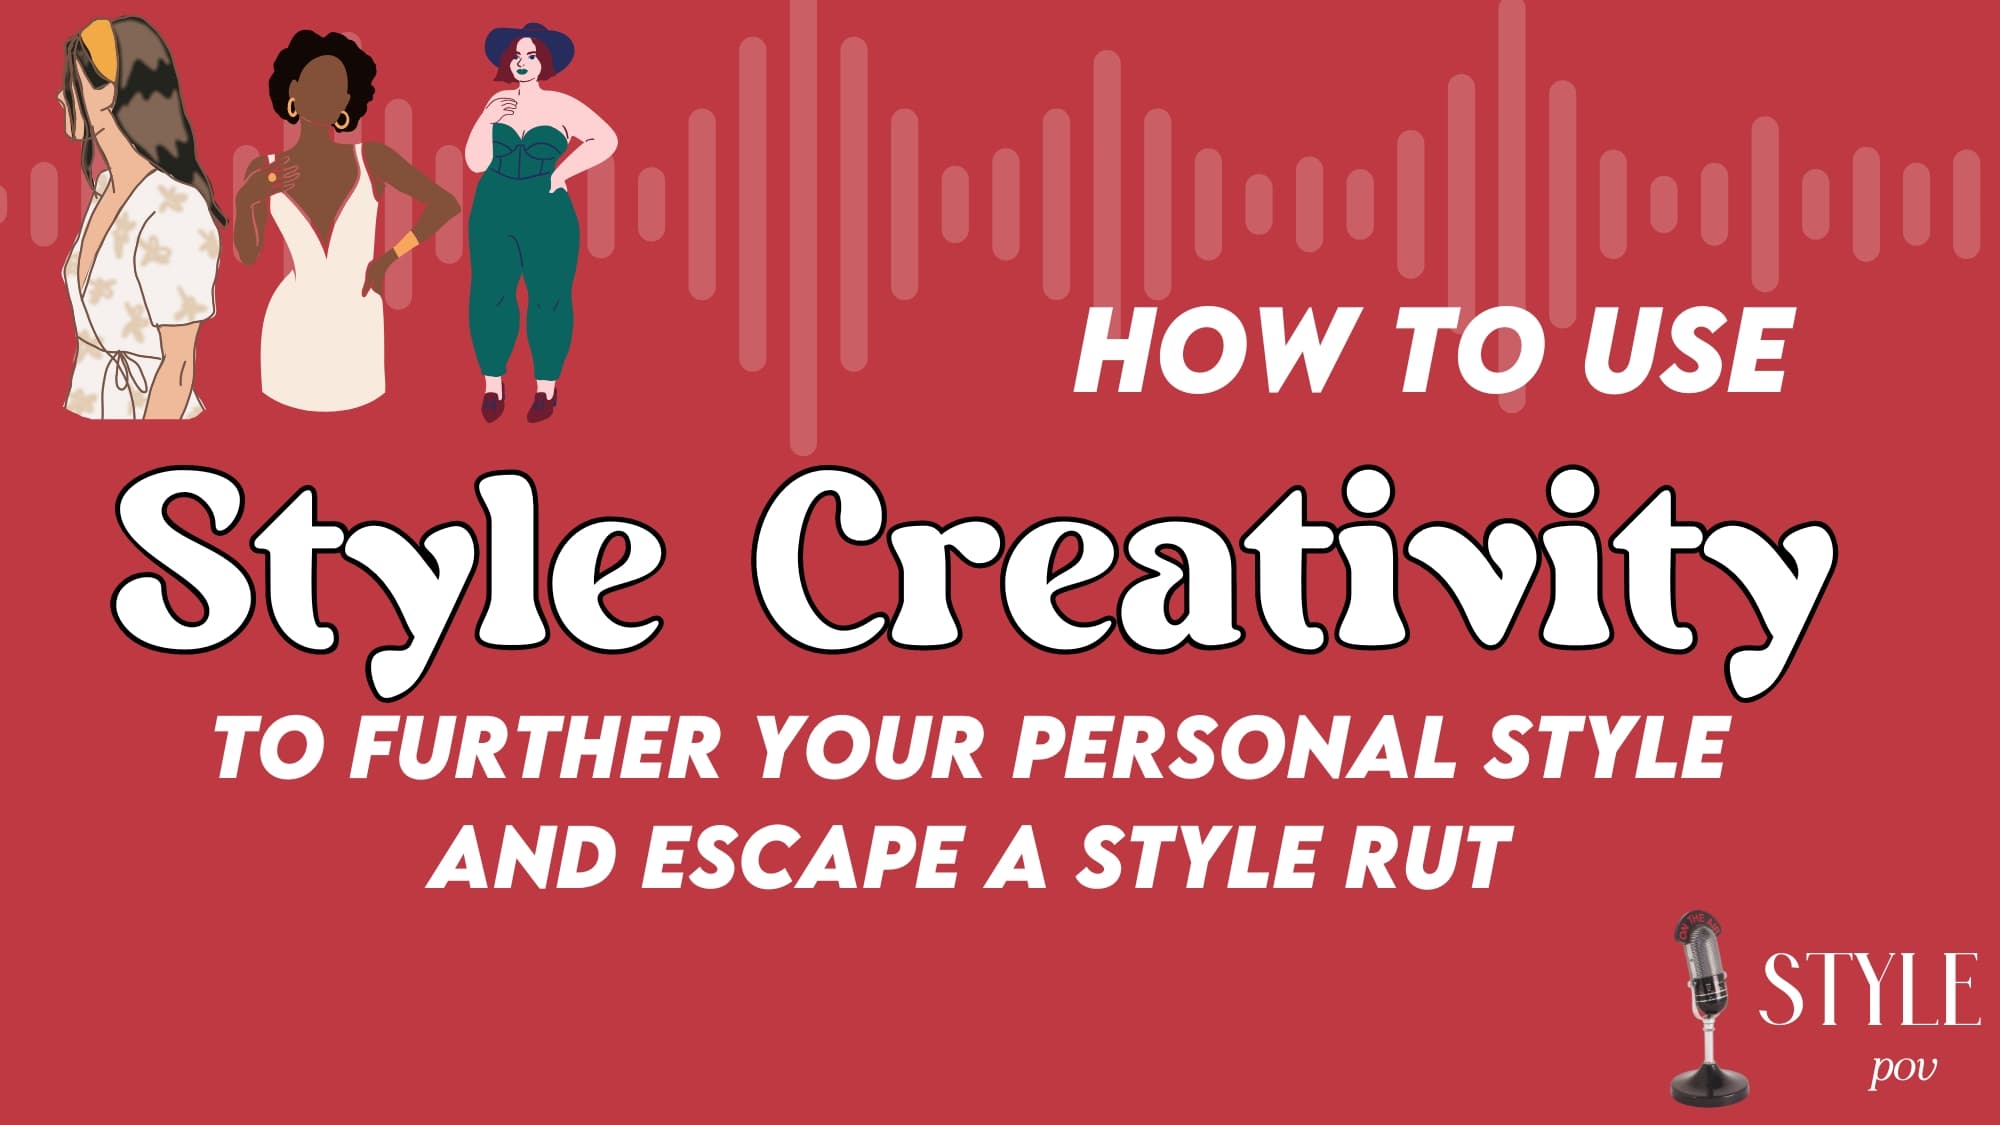 how to use style creaitivty to further your personal style and get out of a style rut